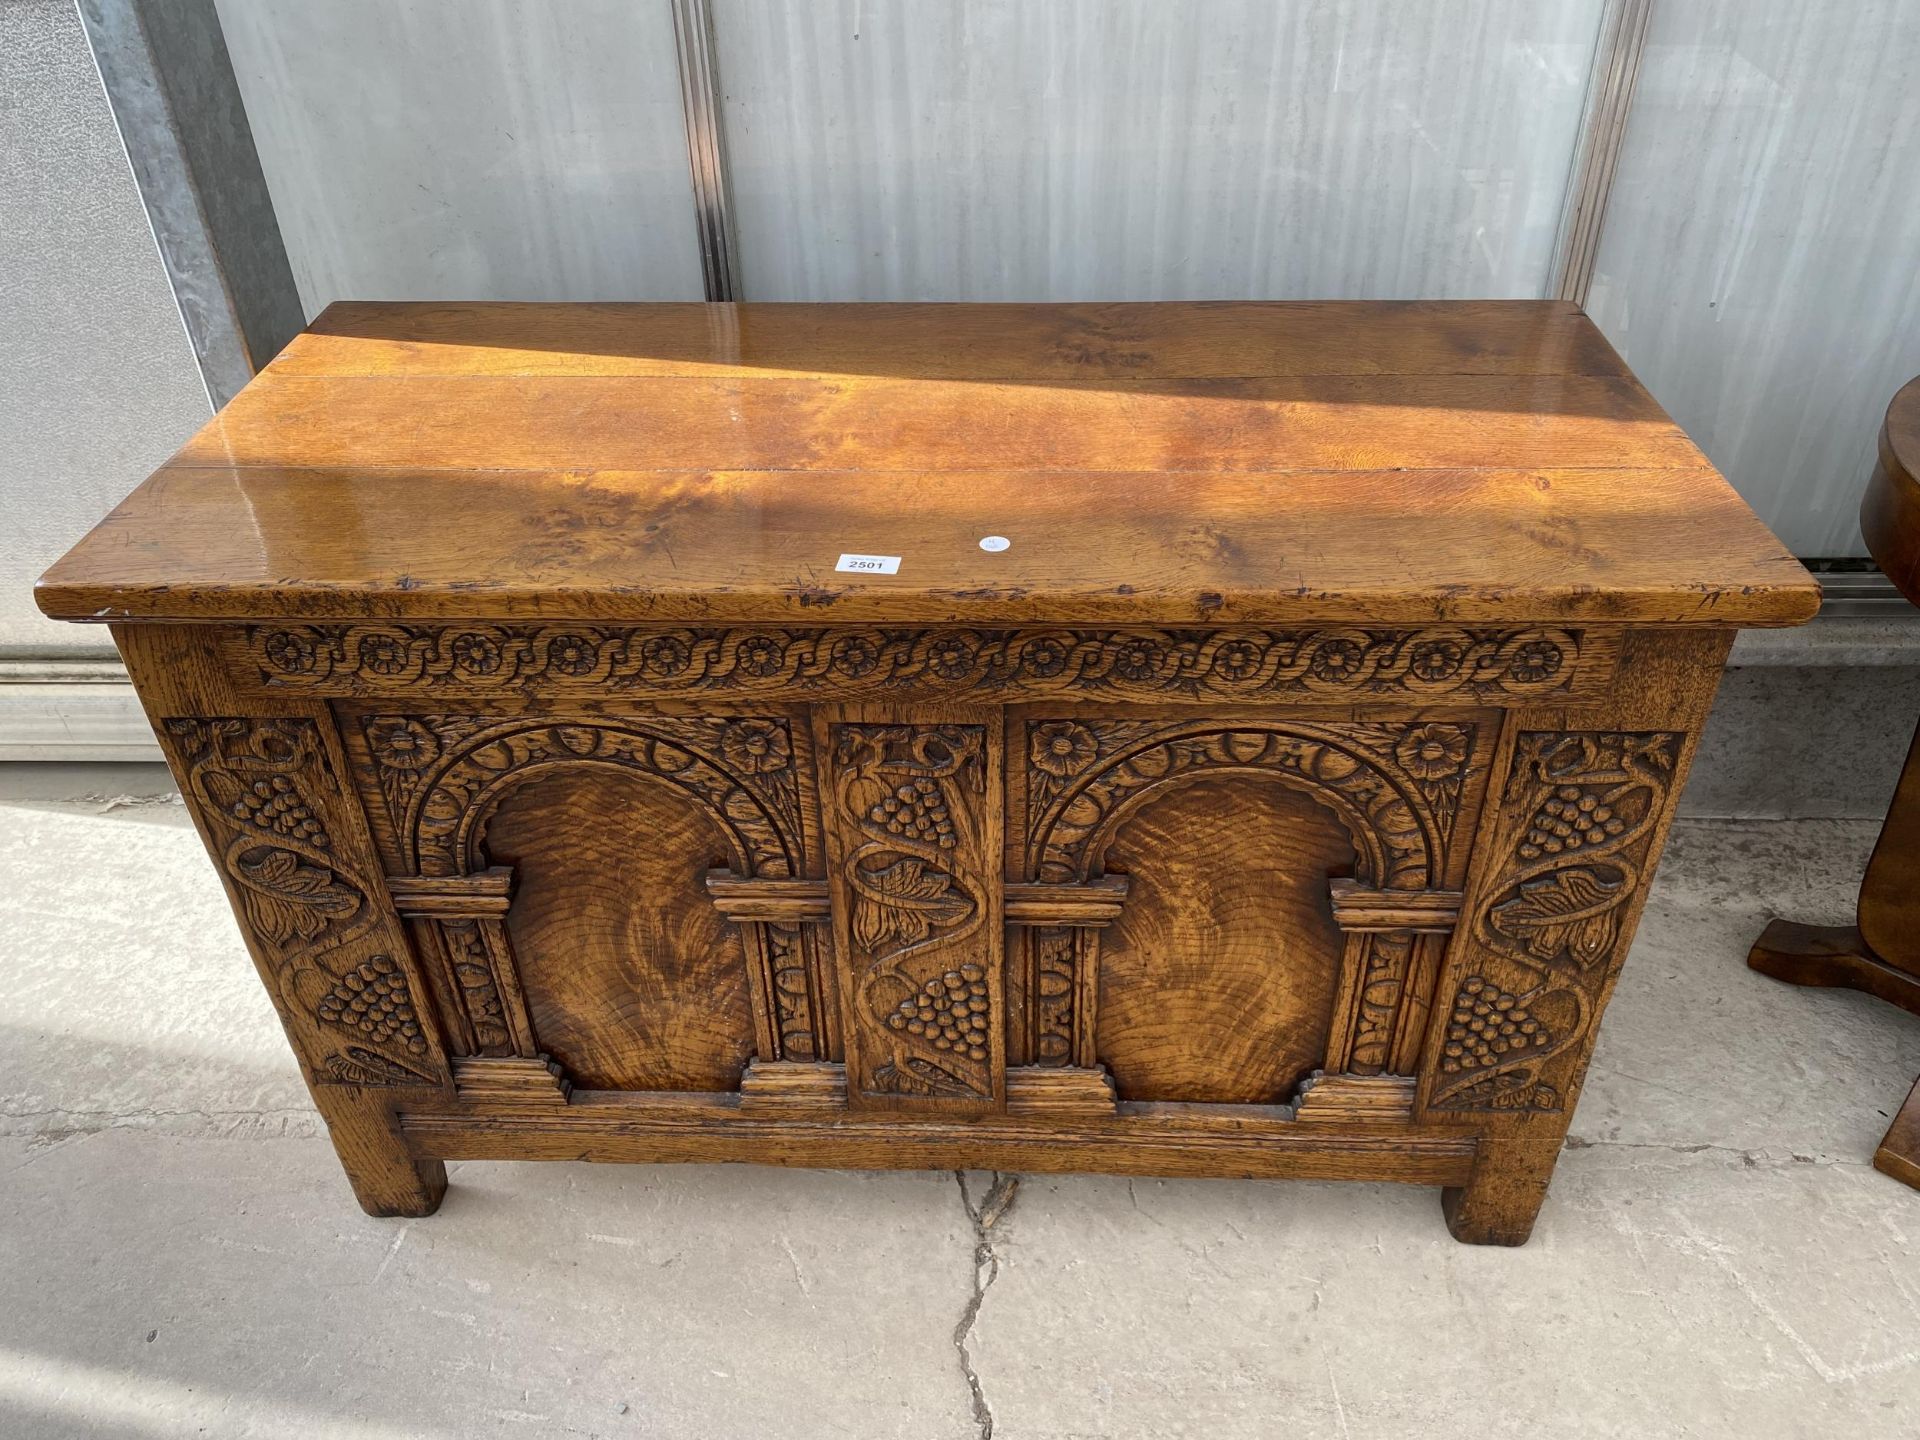 AN 18TH CENTURY STYLE OAK RUG/BLANKET CHEST WITH CARVED FRONT PANELS AND DROP-IN SLIDING TRAY, 42"